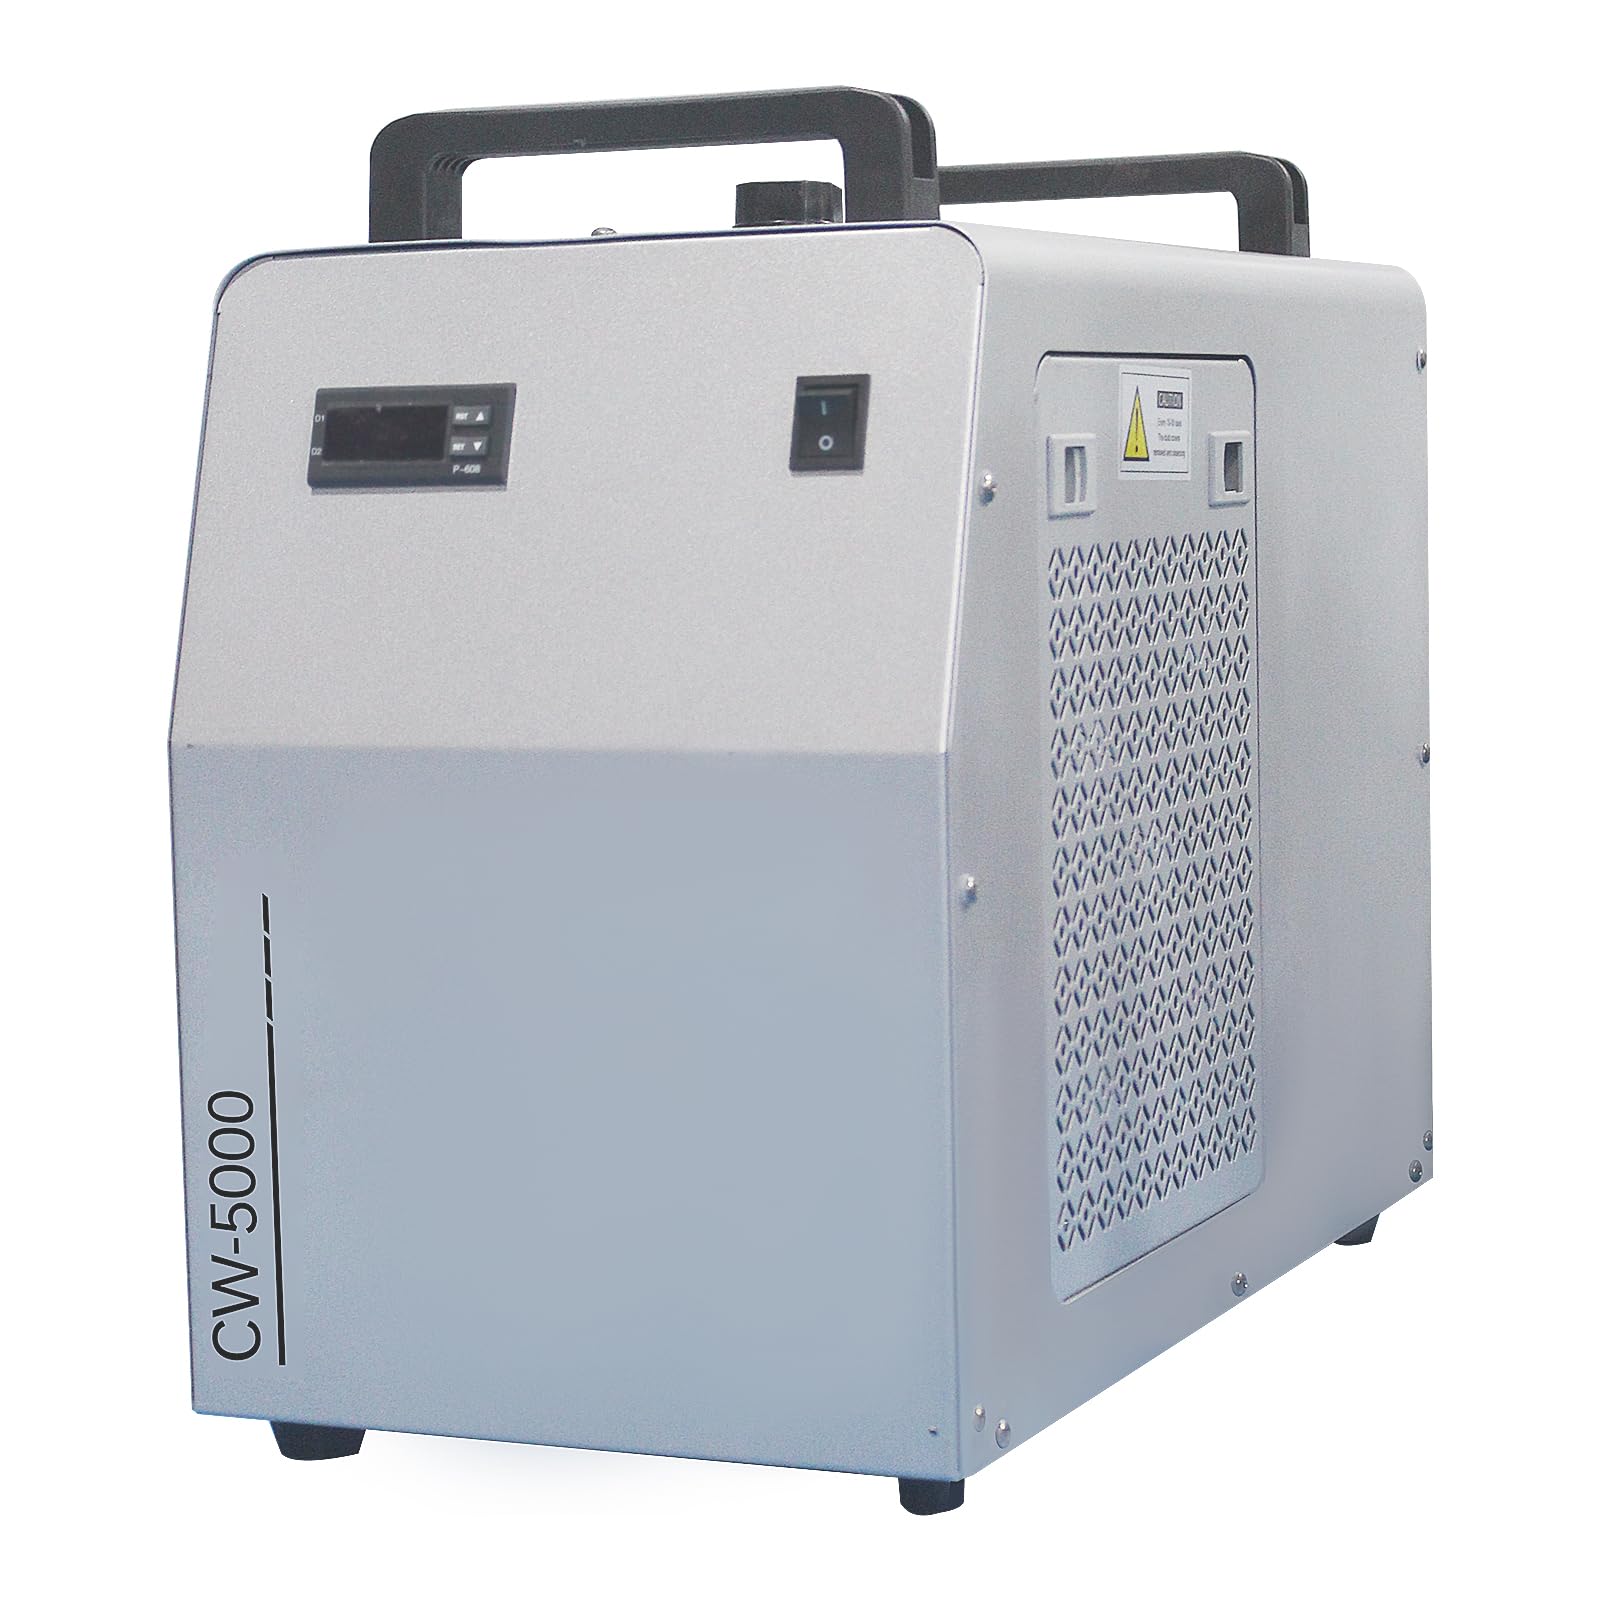 CW-5000 Water Chiller, 7L, 2.6gpm for CO2 Laser Machines